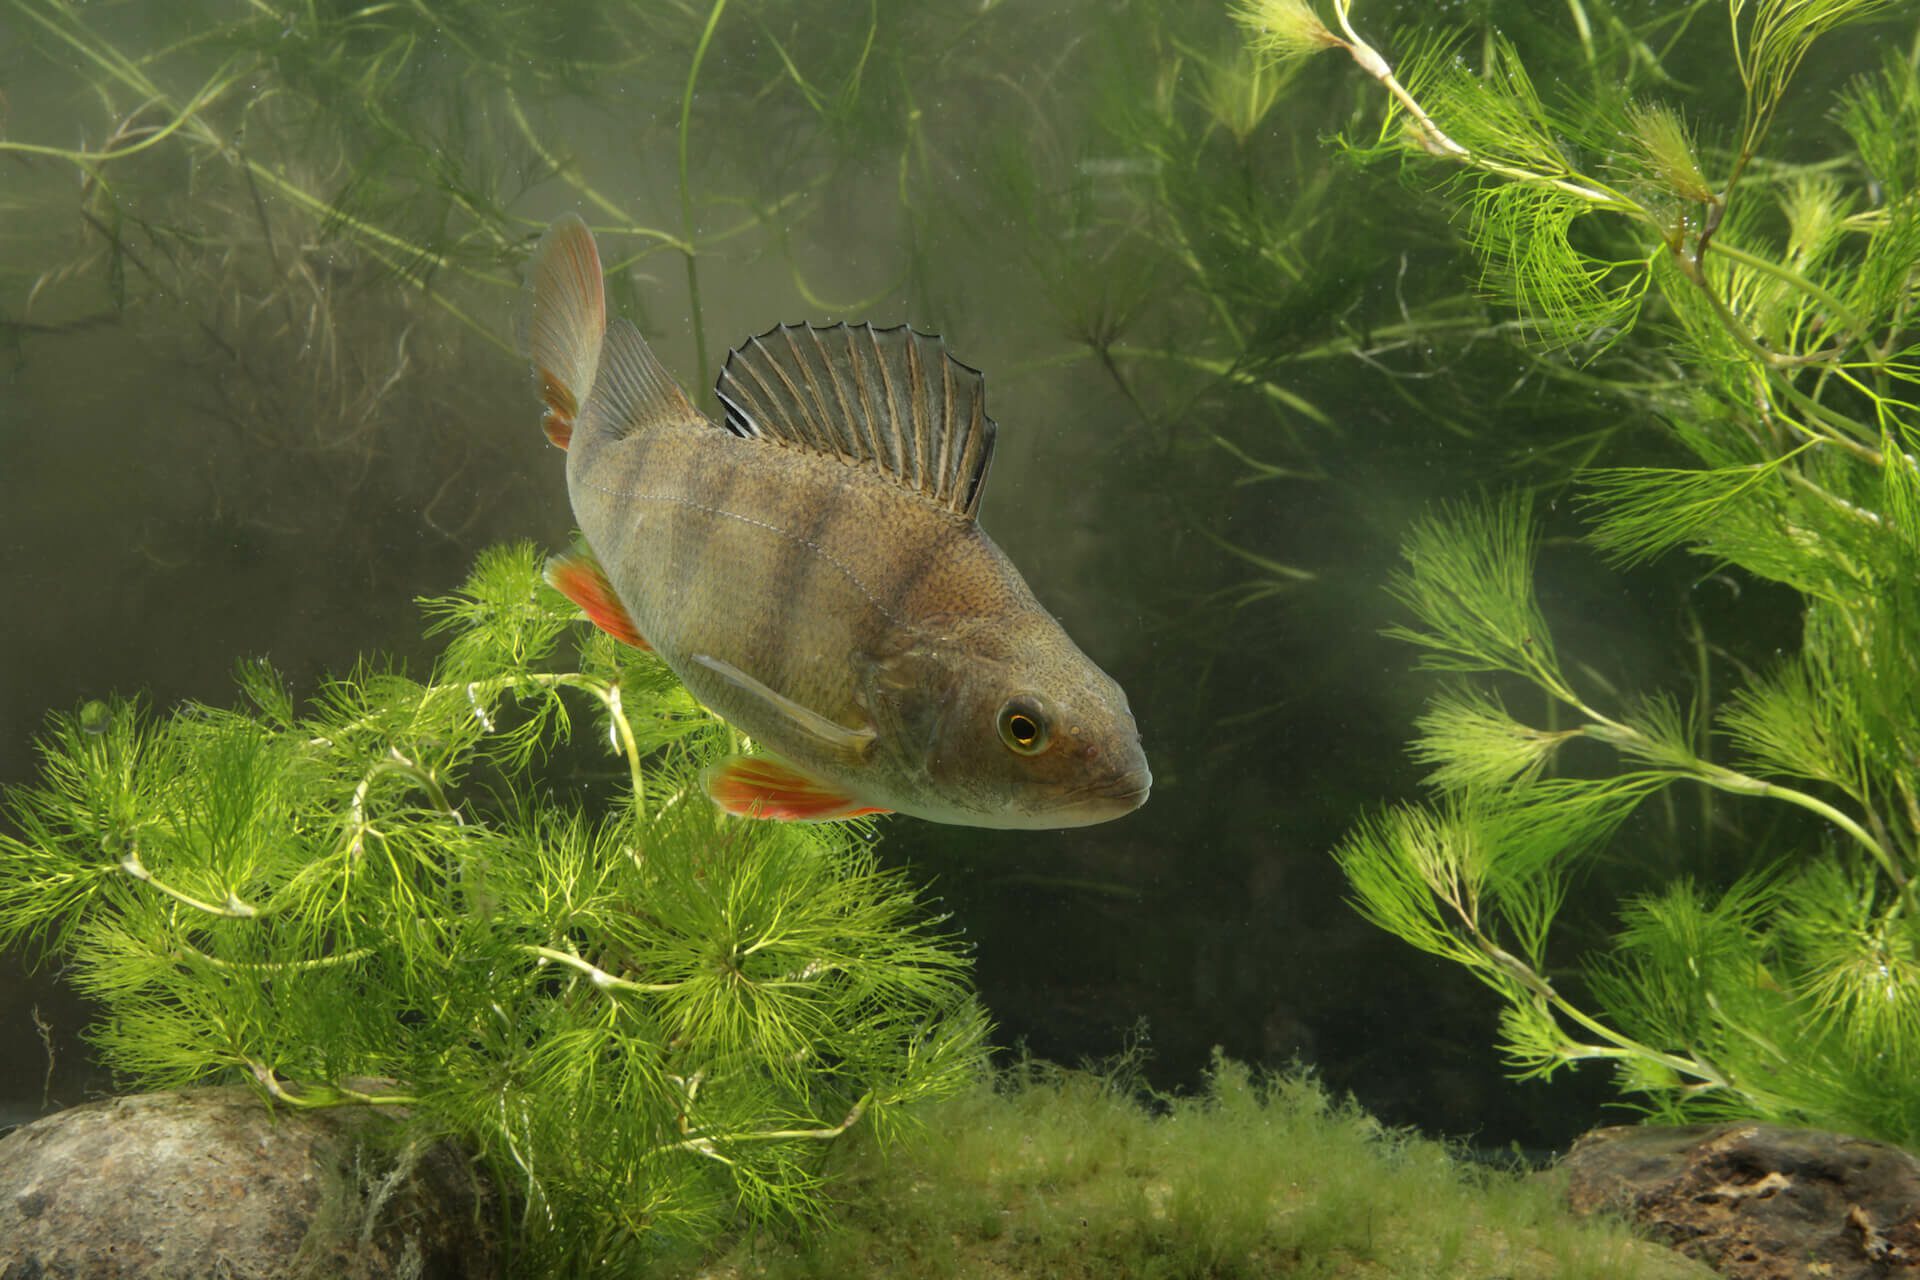 Are Perch Good to Eat? Yes, if they come from clean water. Perch in its Habitat